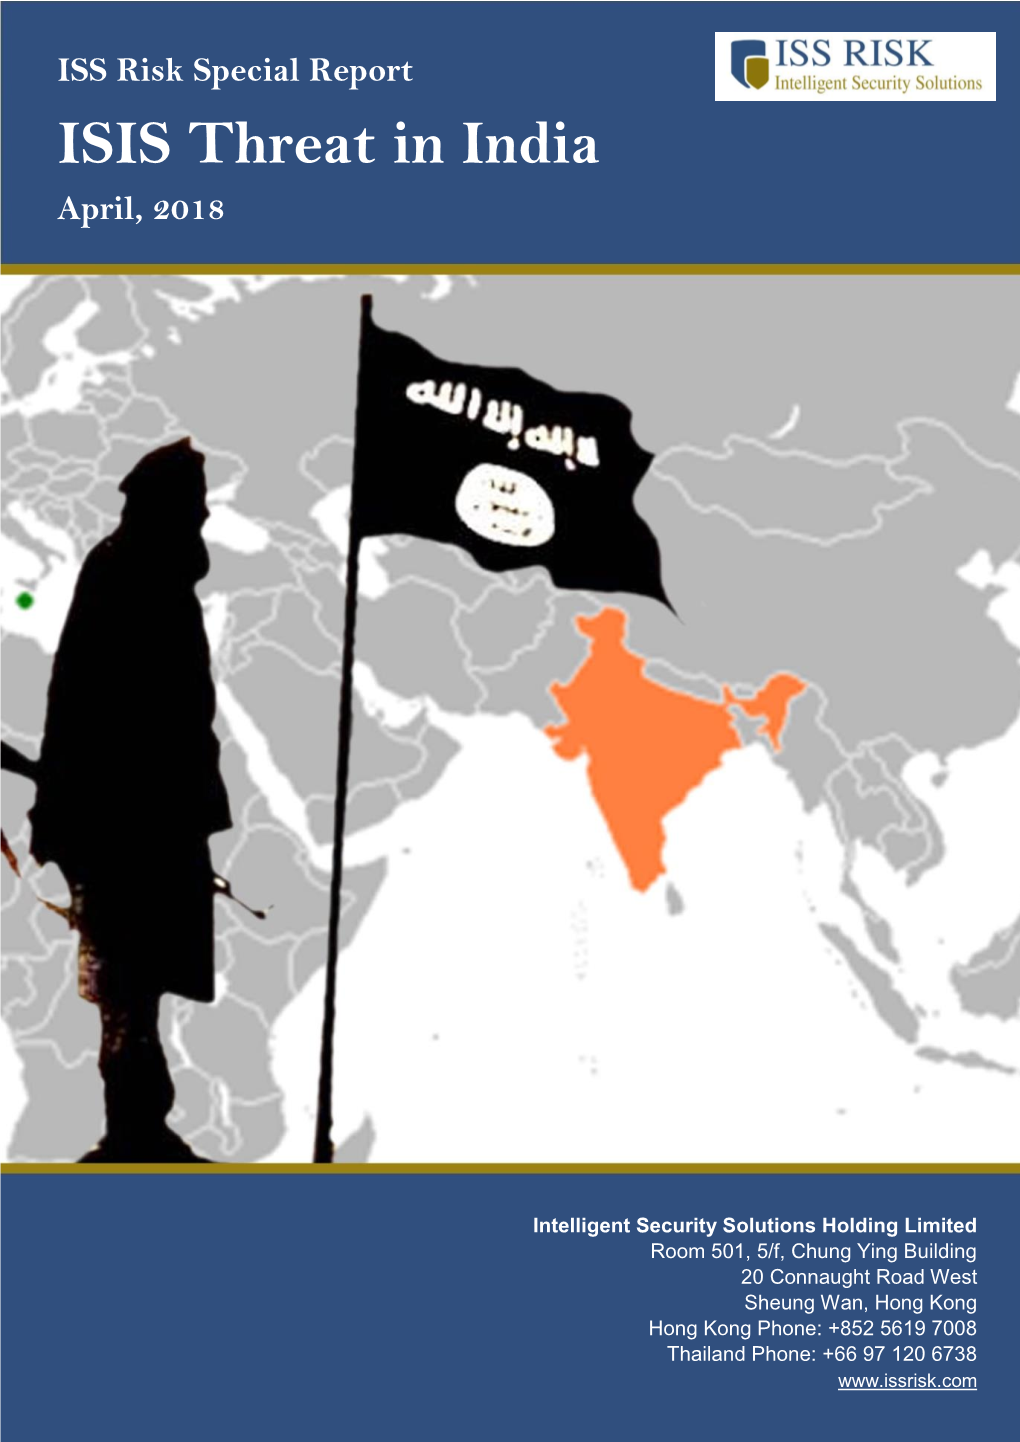 ISS Risk Special Report ISIS Threat in India April, 2018